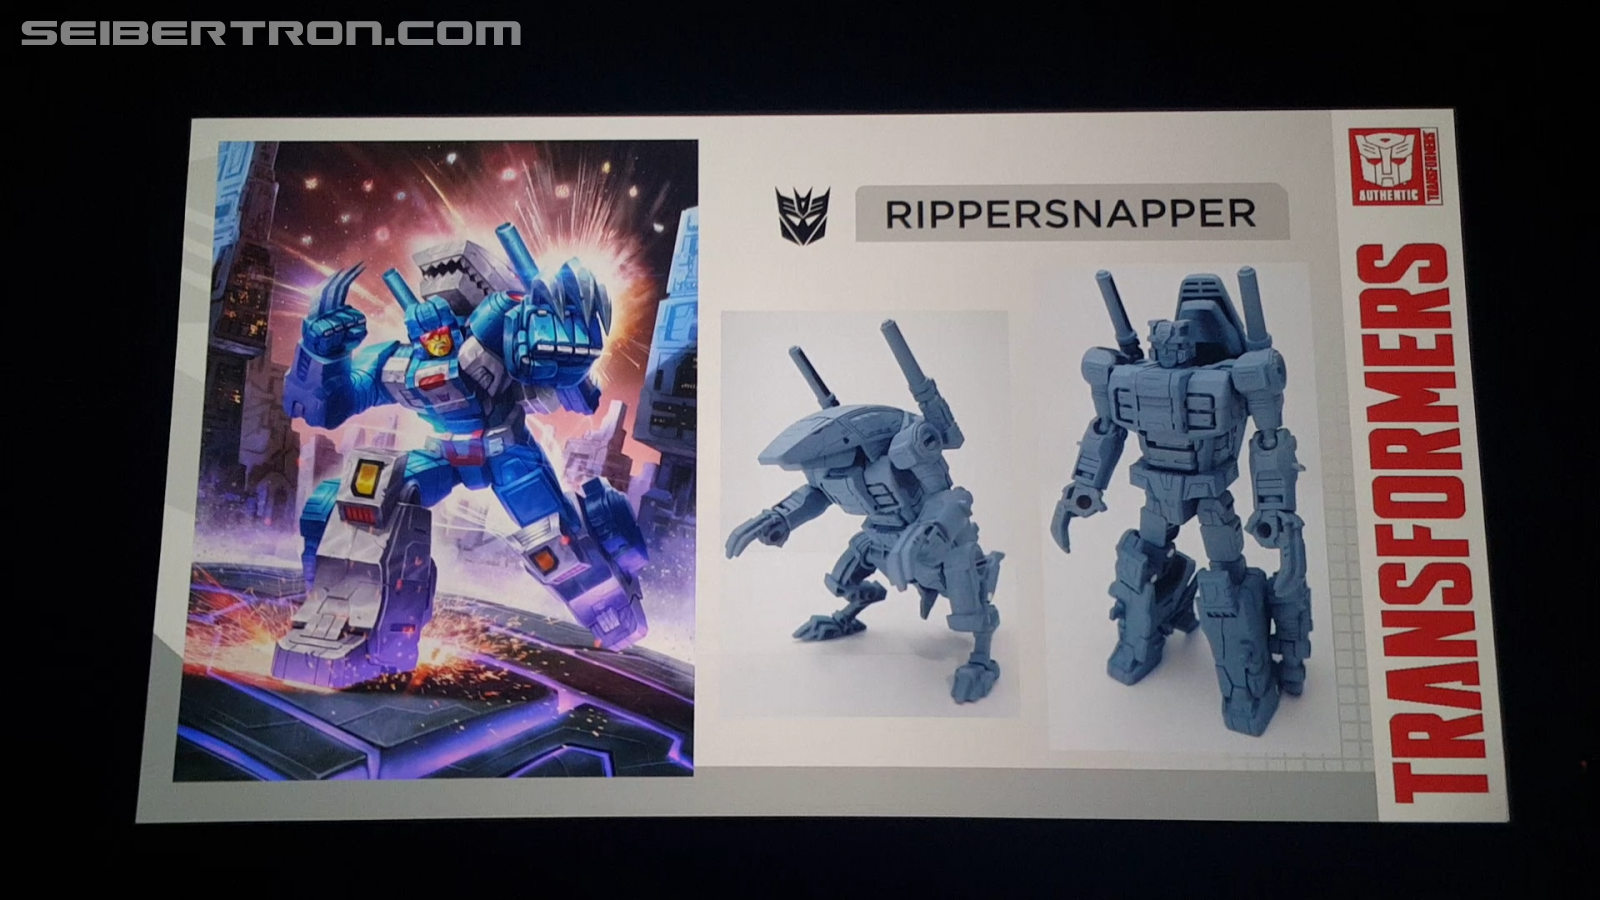 Transformers News: Twincast / Podcast Episode #184 "The Search for Alpha Trion"